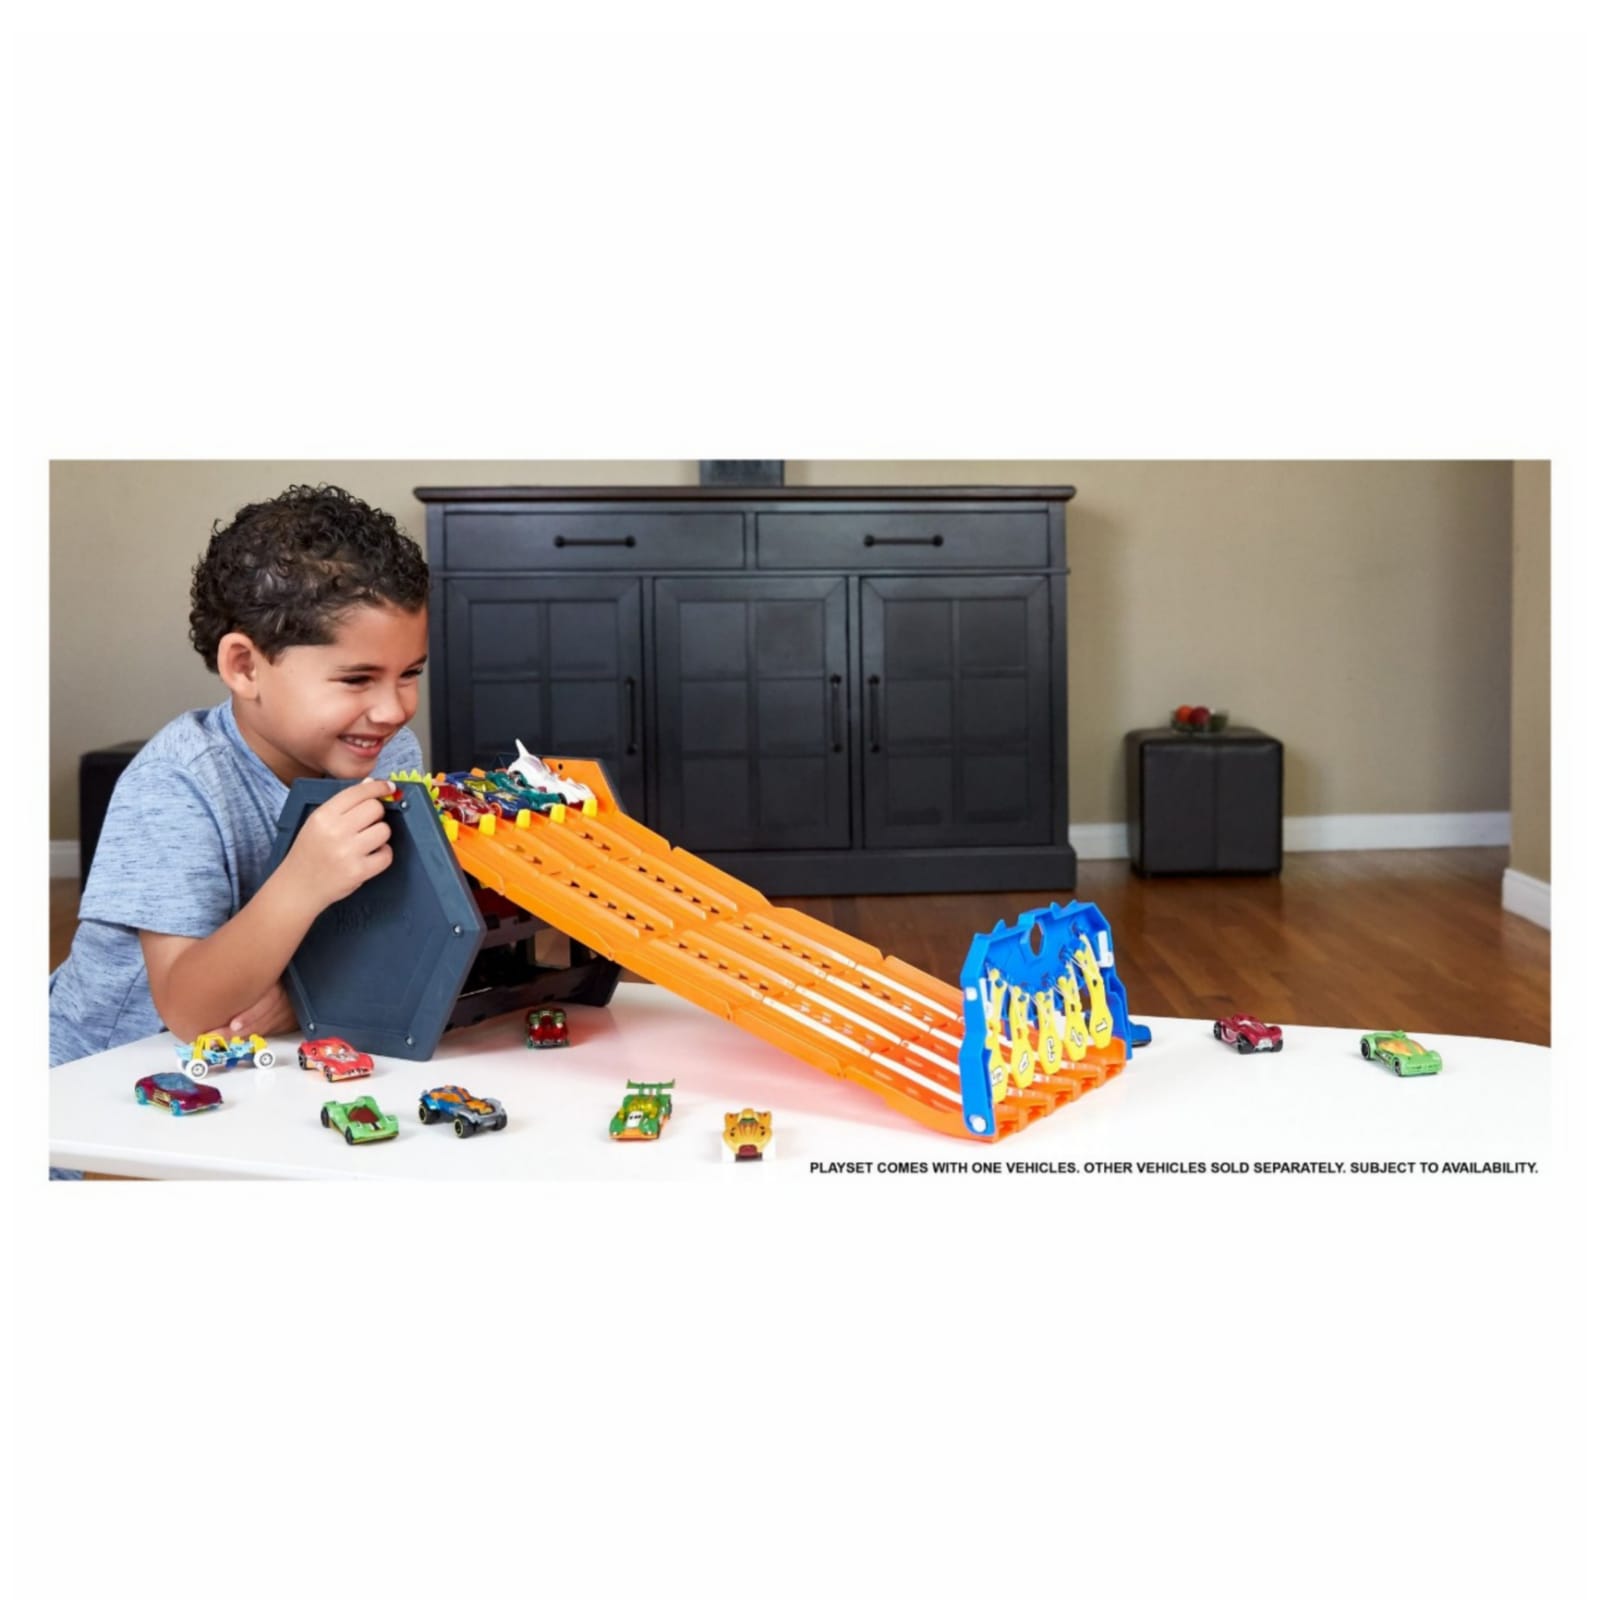  Hot Wheels Roll Out Raceway Track Set, Storage Bucket Unrolls  into 5-Lane Racetrack for Multi-Car Play, Connects to Other Sets, with 1  1:64 Car, for Kids 4 Years & Up 